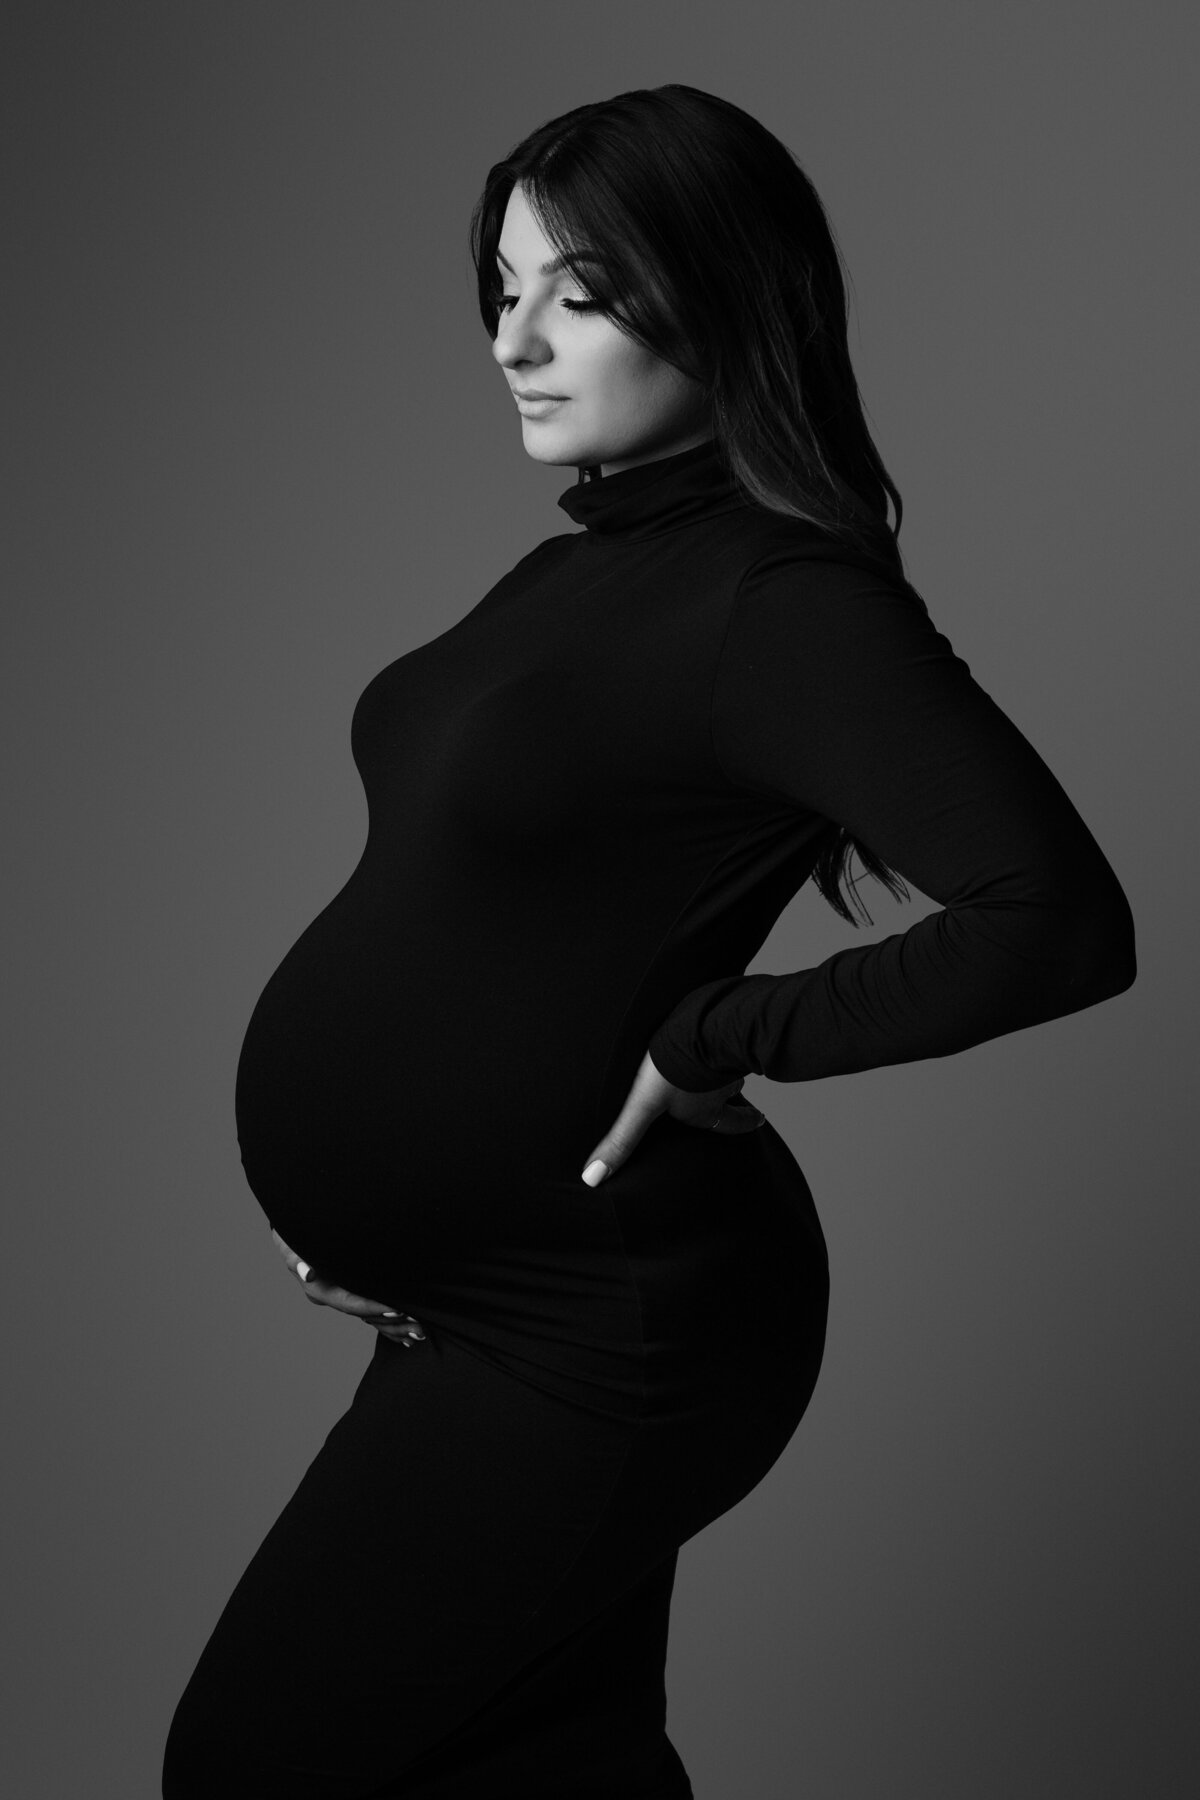 Black and white maternity portrait  with long haired woman wearing tight black dress holding baby bump and other hand on her back